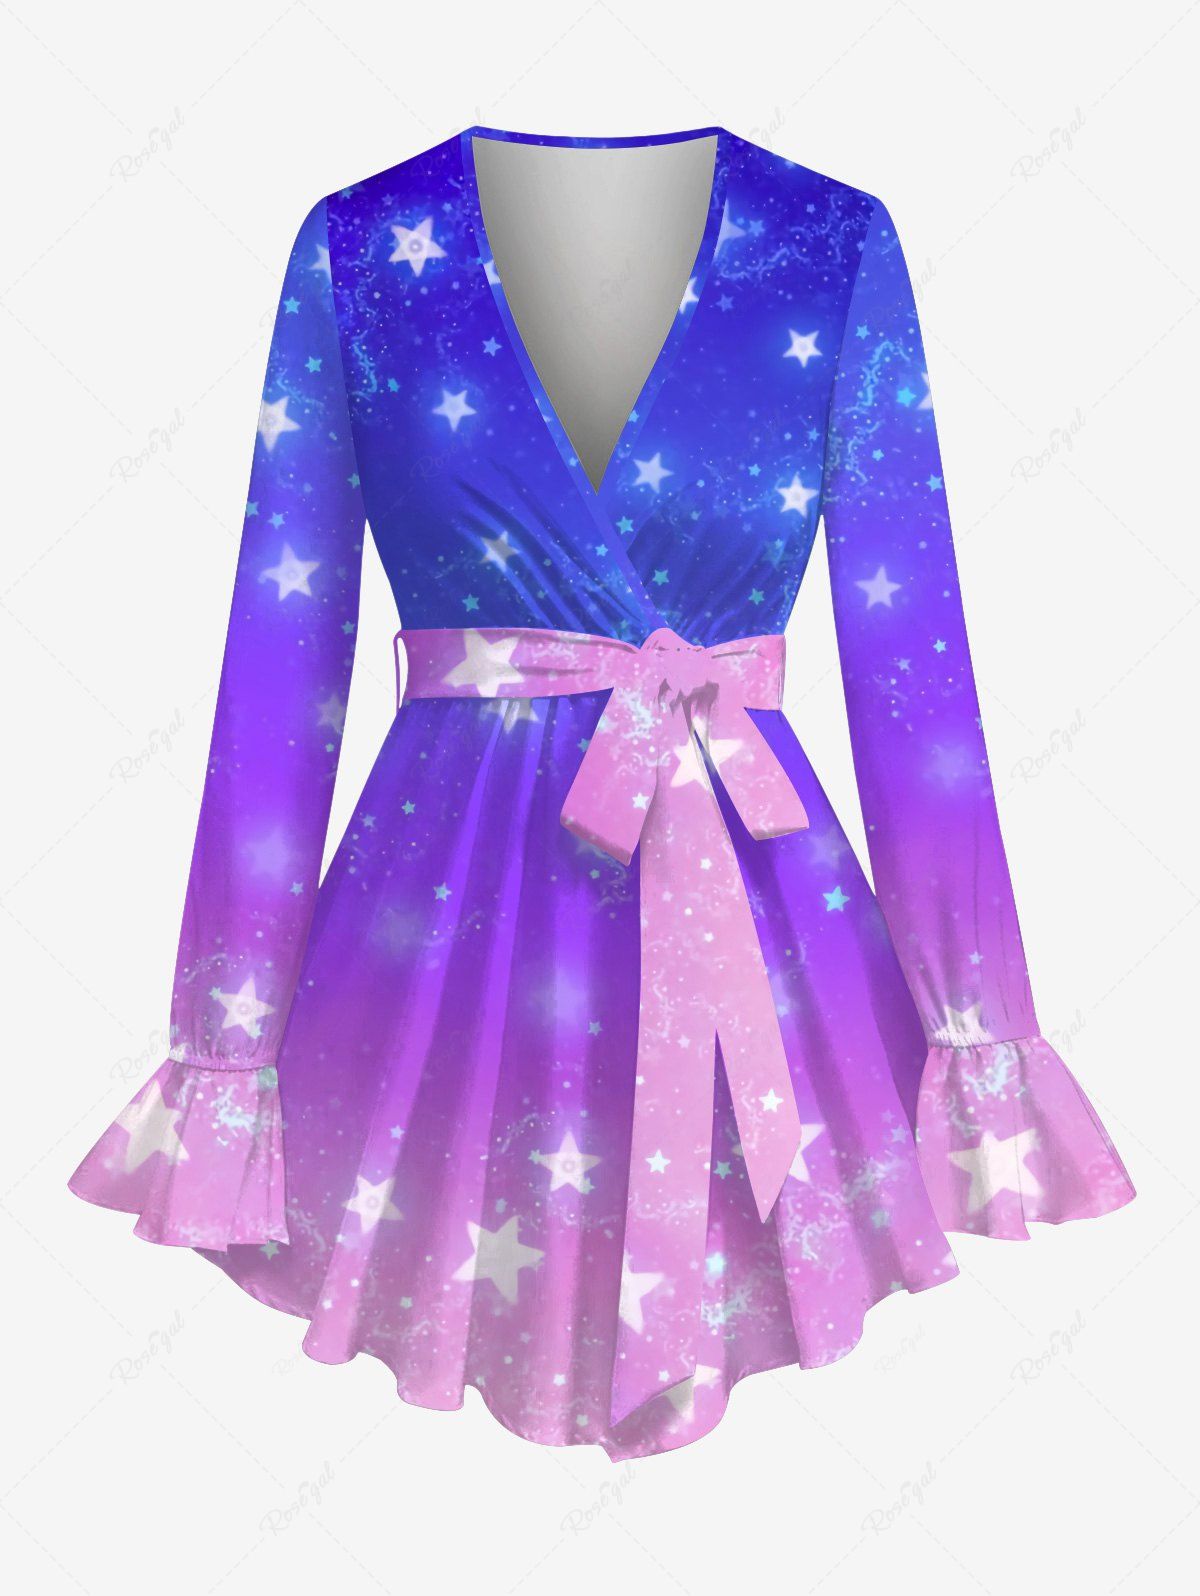 Chic Plus Size Poet Sleeves Stars Galaxy Print Ombre Shirt with Removable Tied Belt  